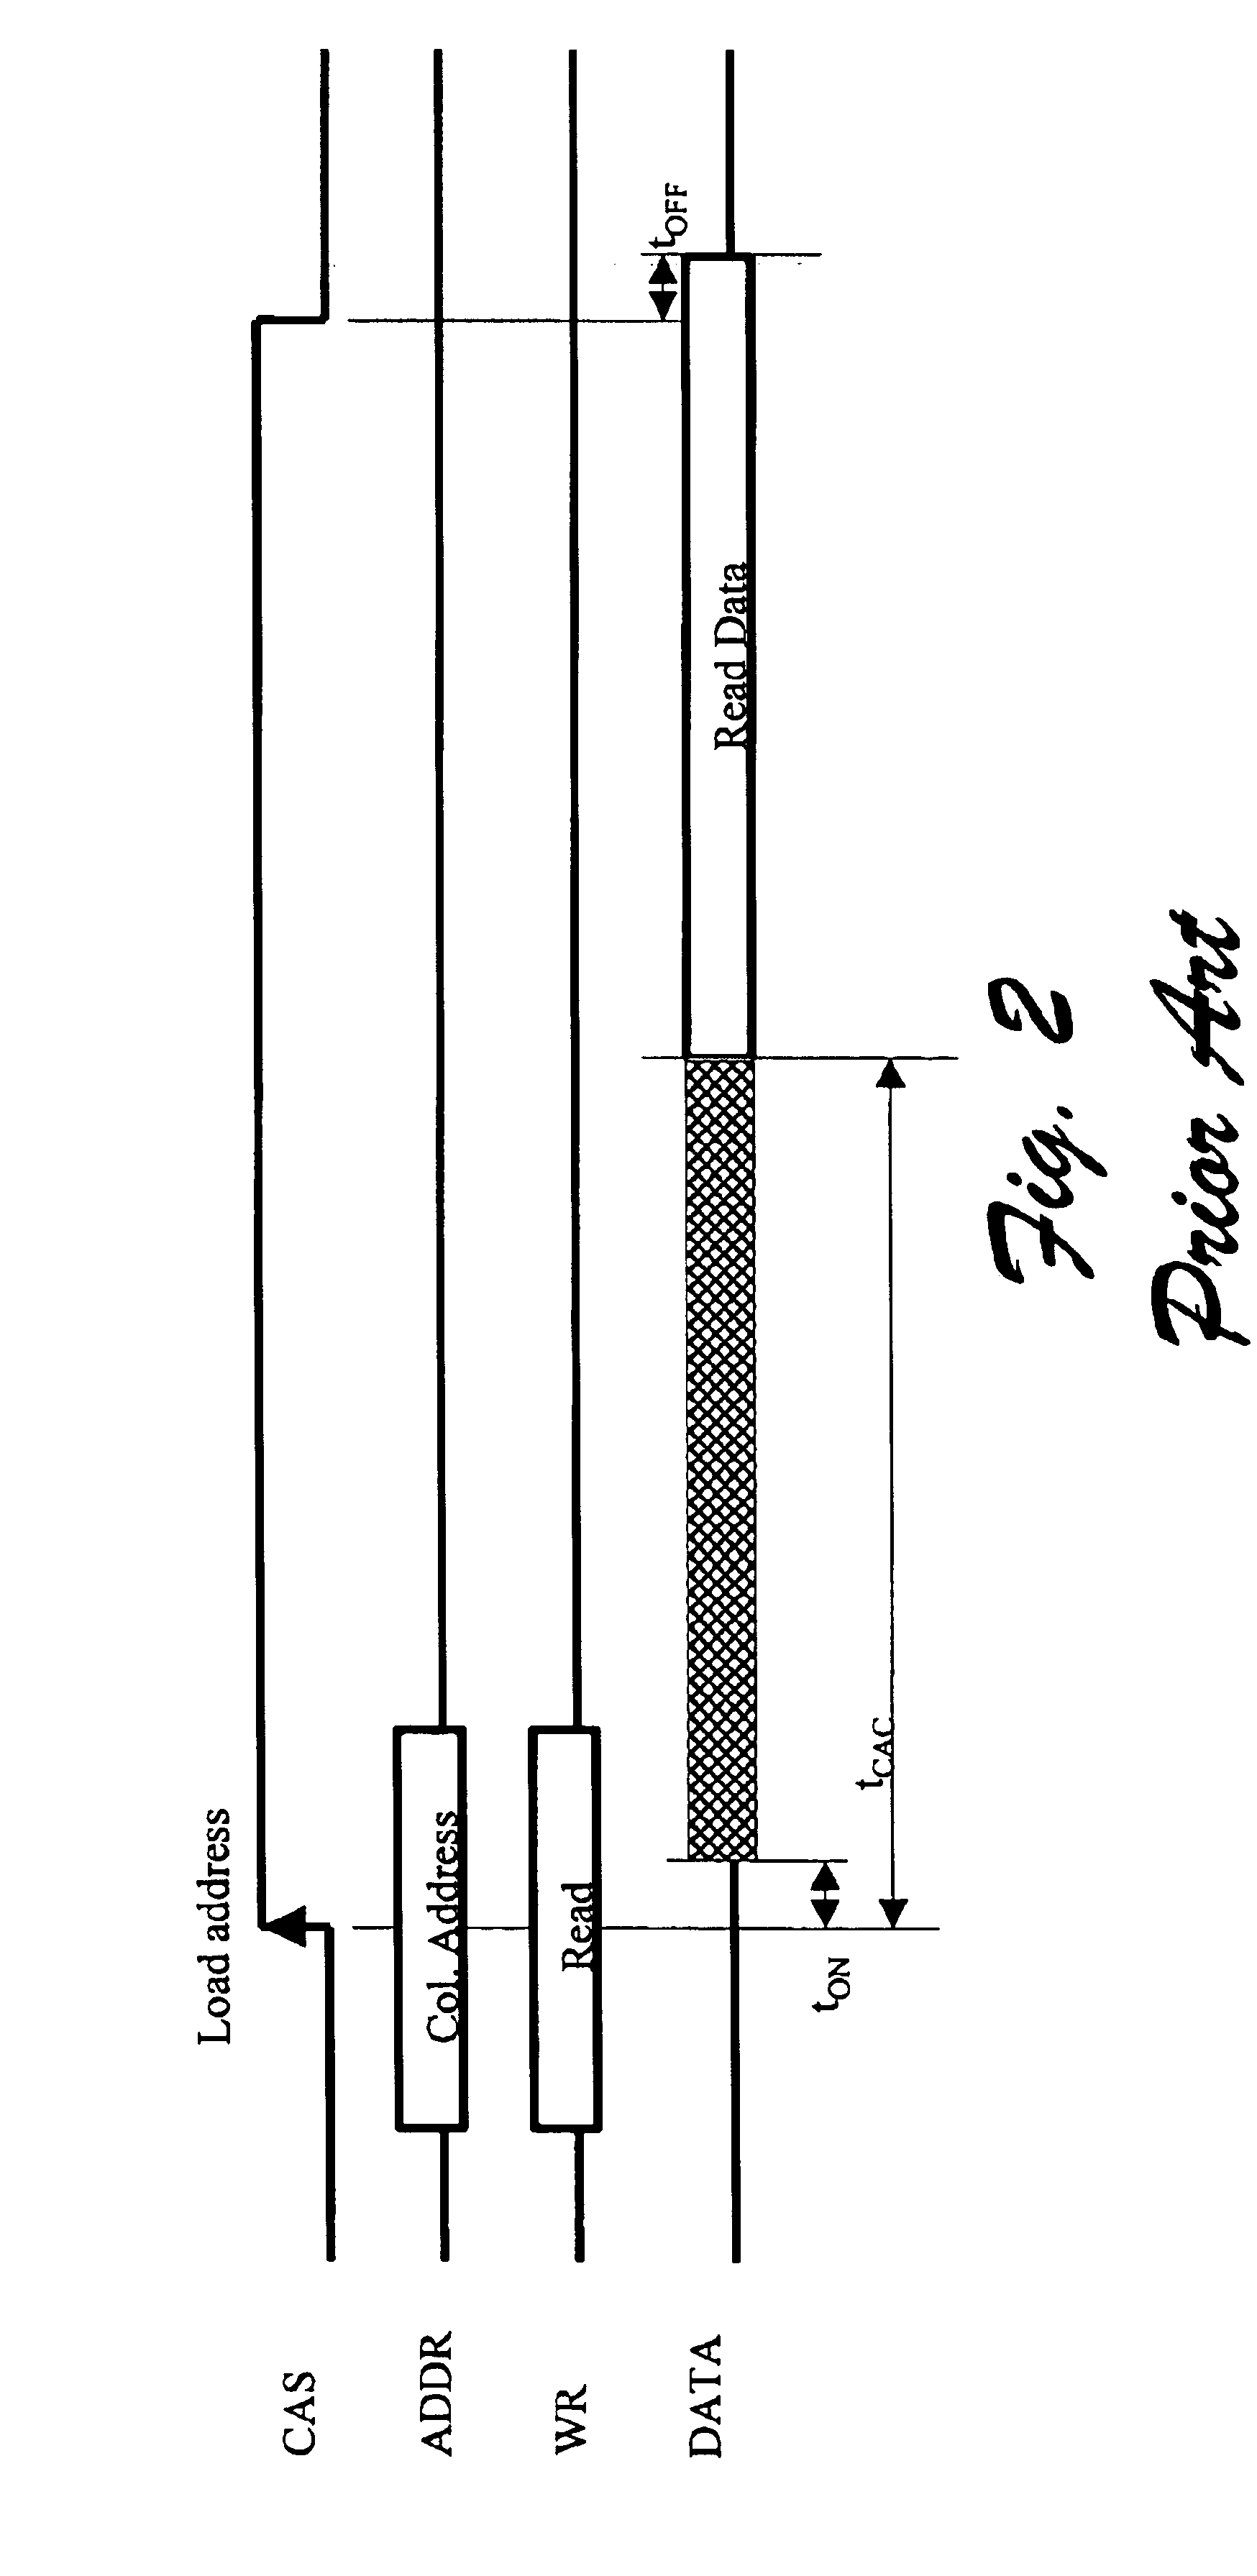 Asynchronous, high-bandwidth memory component using calibrated timing elements